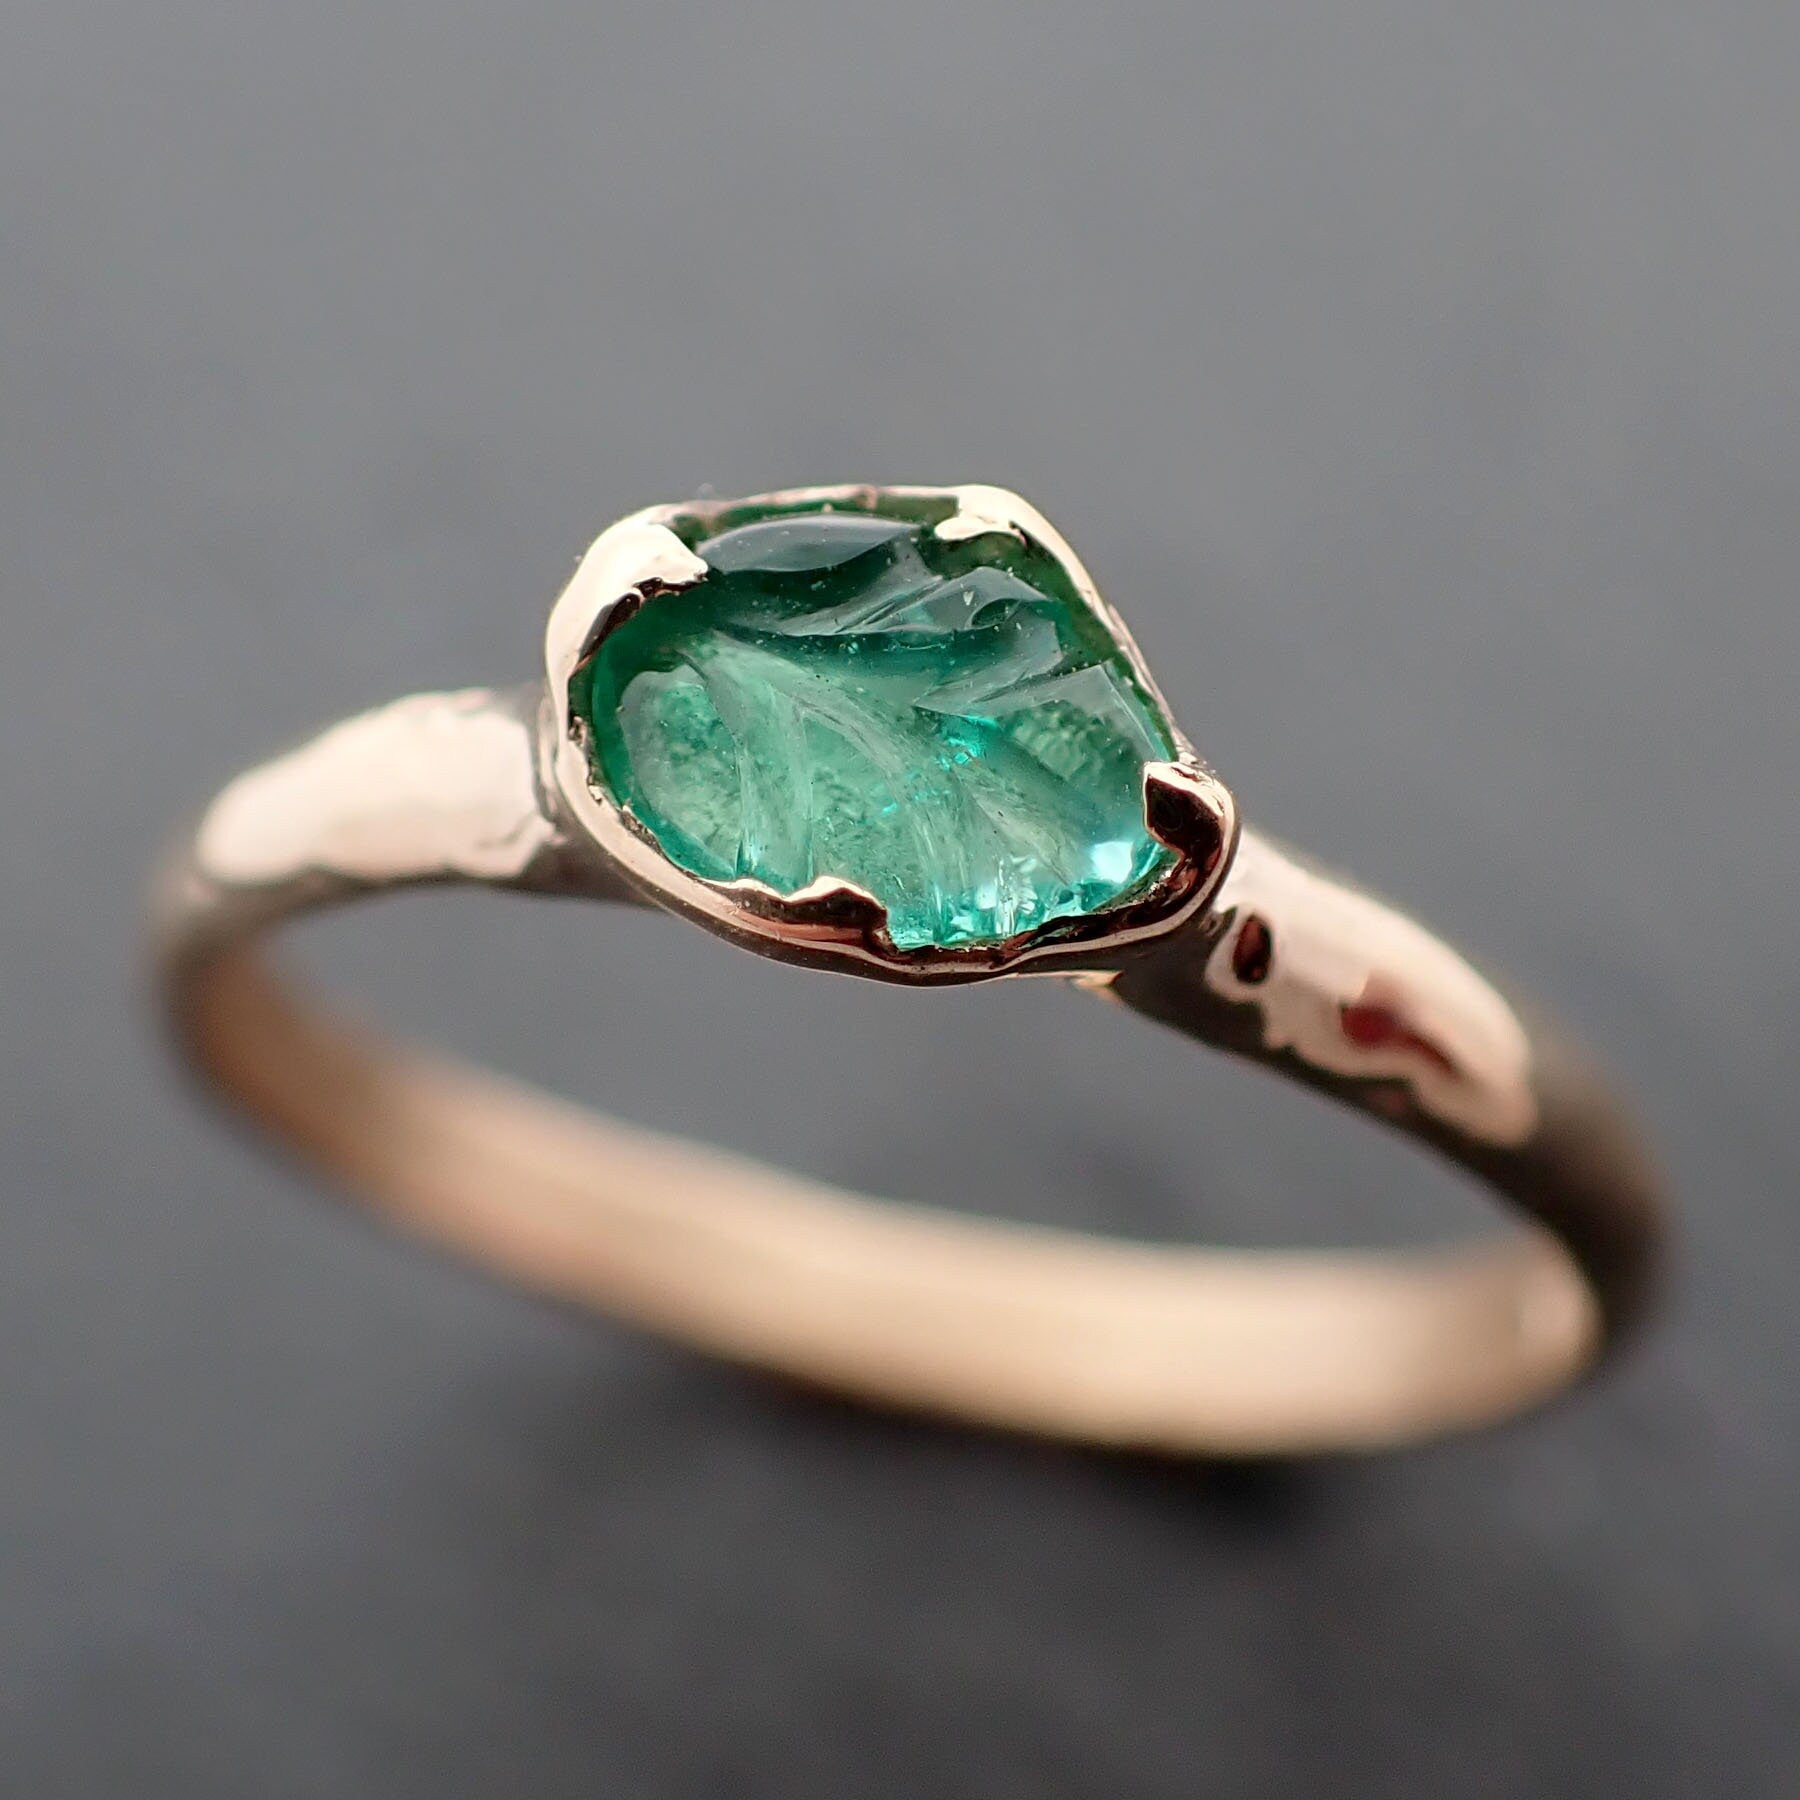 Carved Leaf Emerald Solitaire yellow 14k Gold Ring Birthstone One Of a Kind Gemstone Ring Recycled 3387